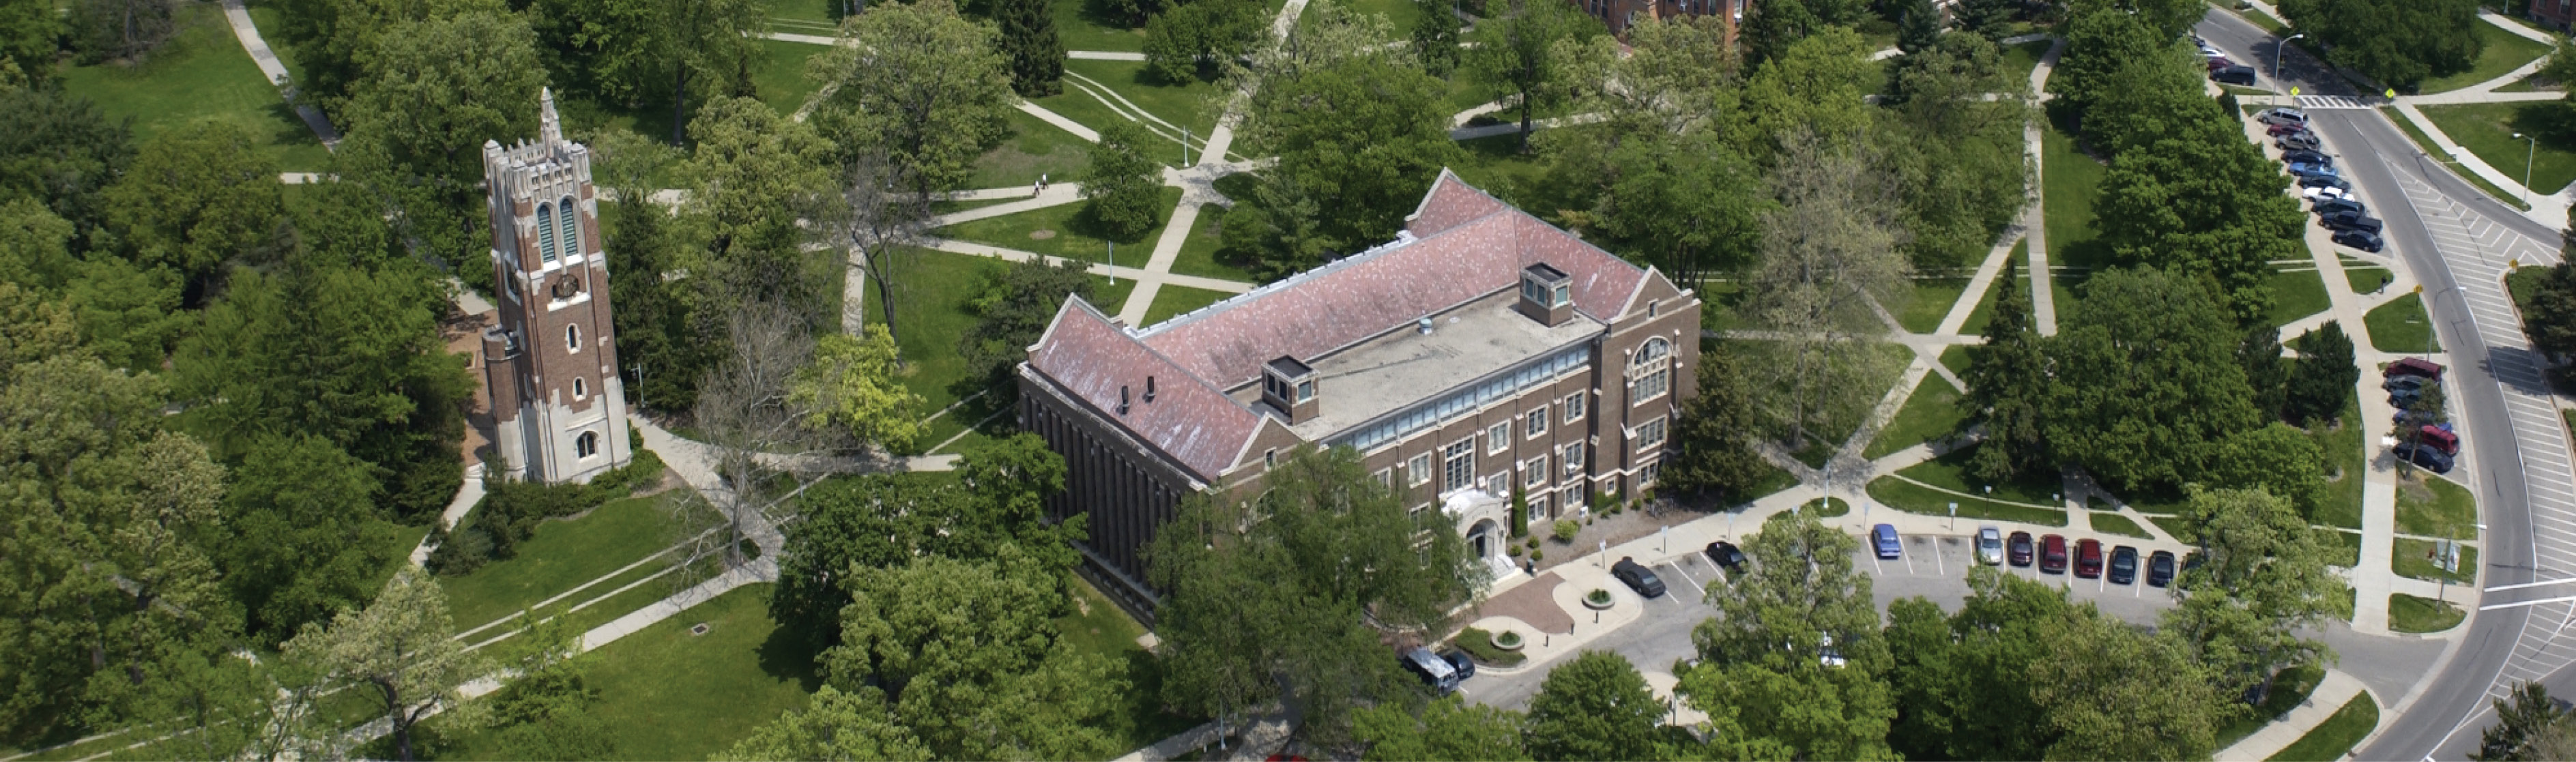 aerial view of campus with Beaumont Tower in the forefront.